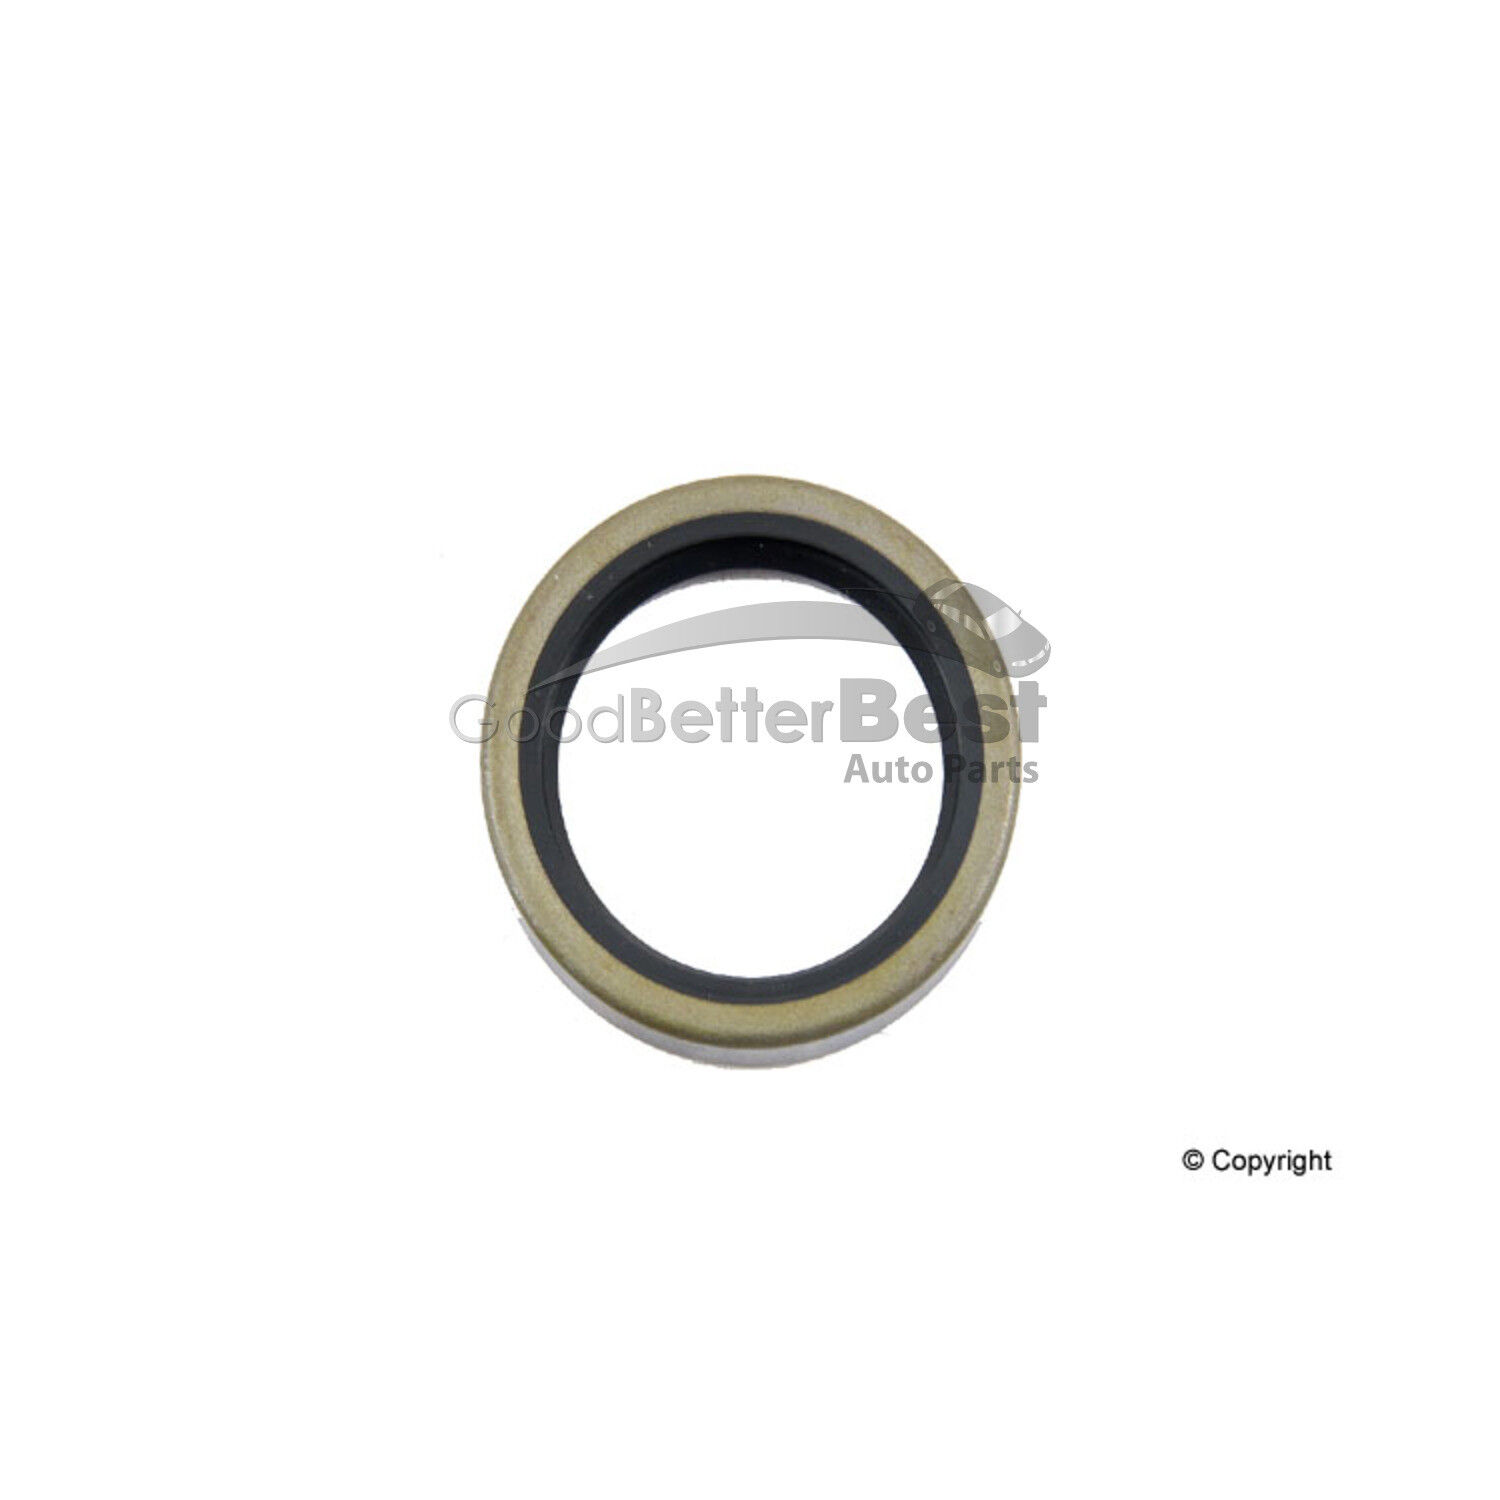 One New Nippon Reinz Wheel Seal Rear 9031142055 for Mazda for Toyota